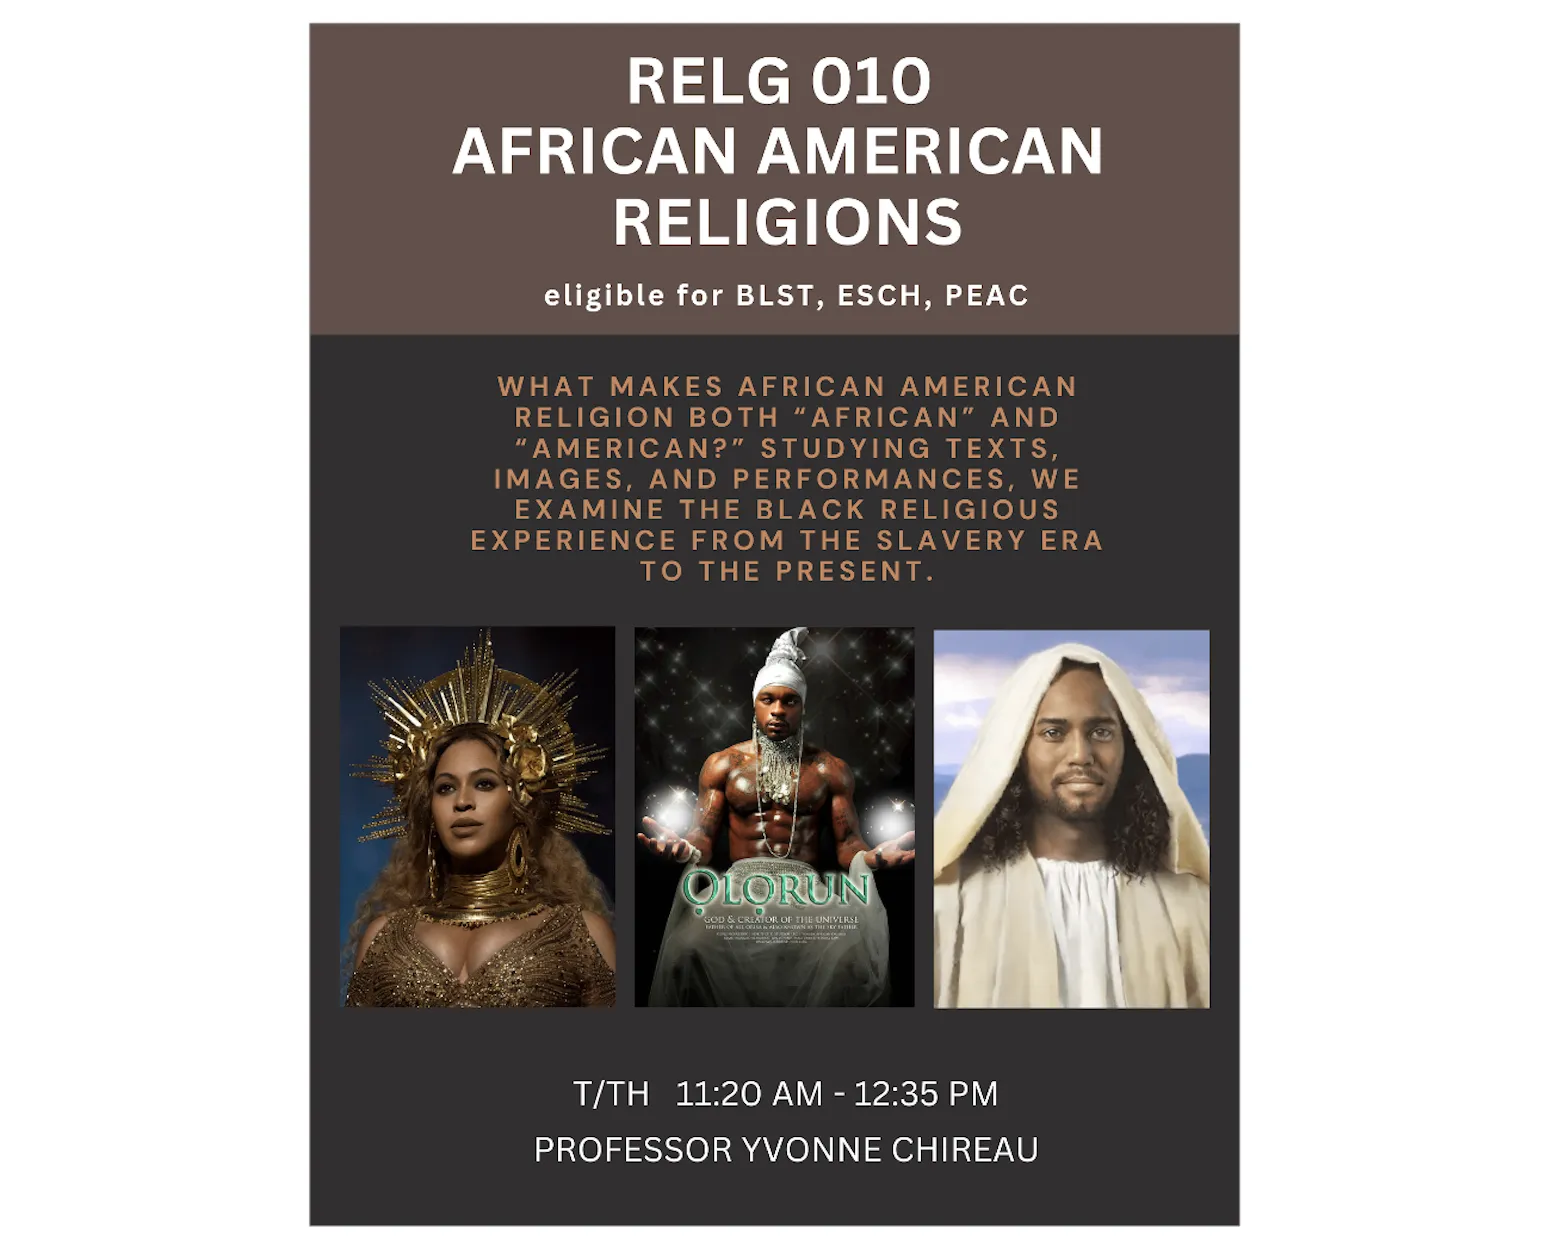 Religion 010: African American REligions